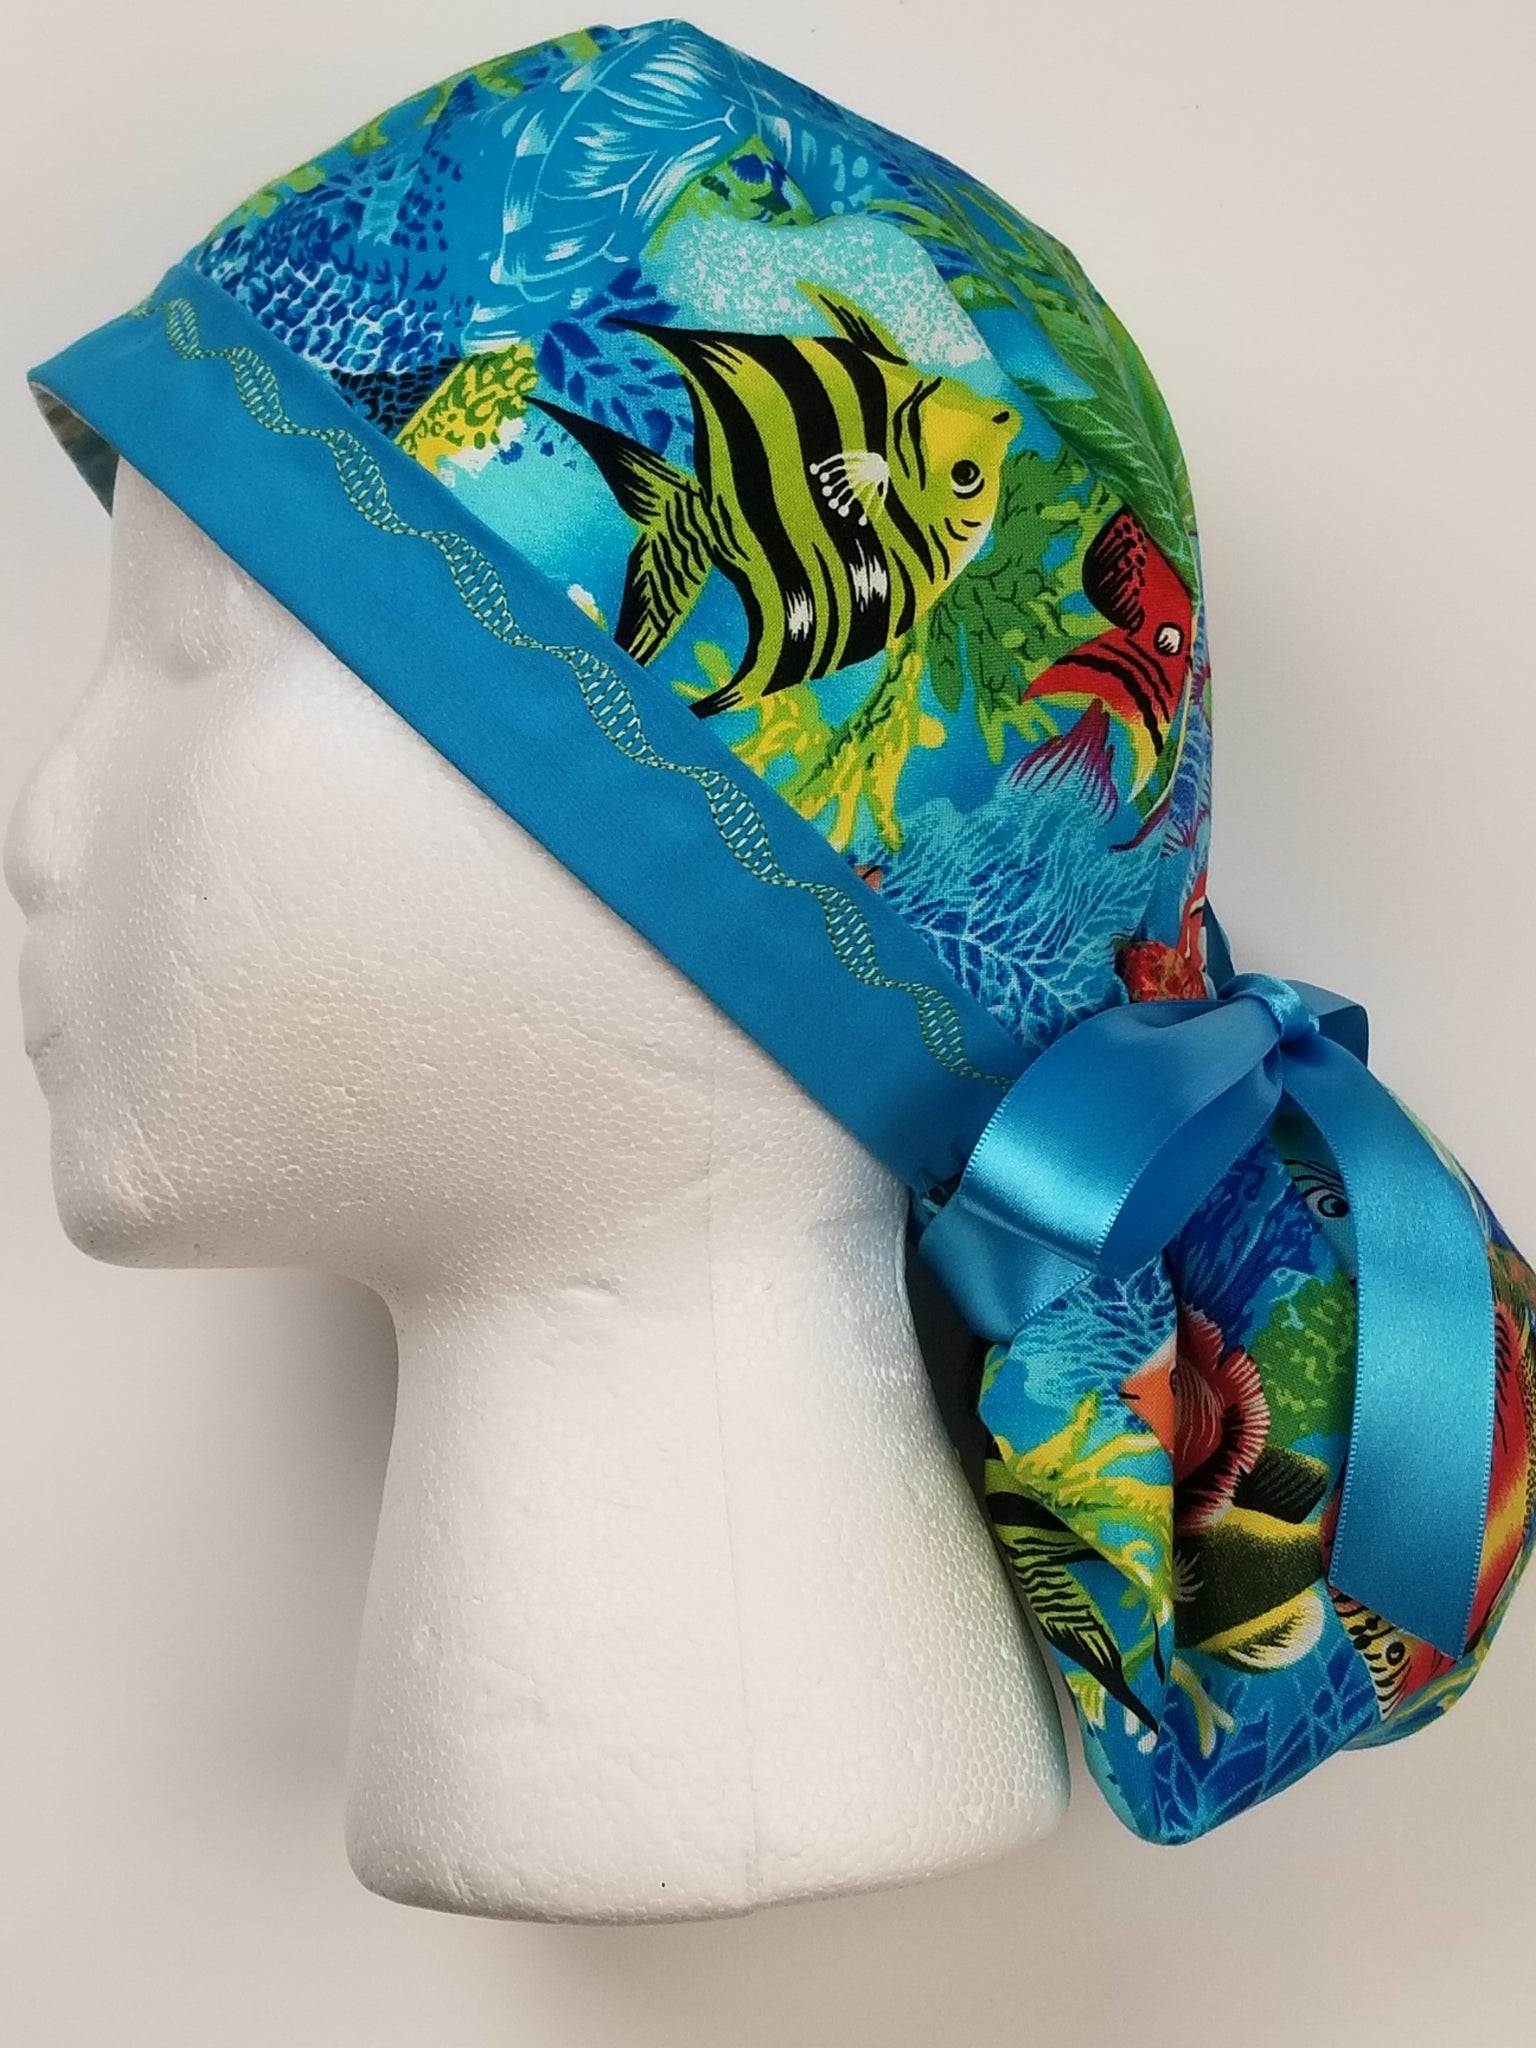 Surgical Ponytail Cap / HEADBAND with DESIGNER STITCHING 5 Fabric Choices